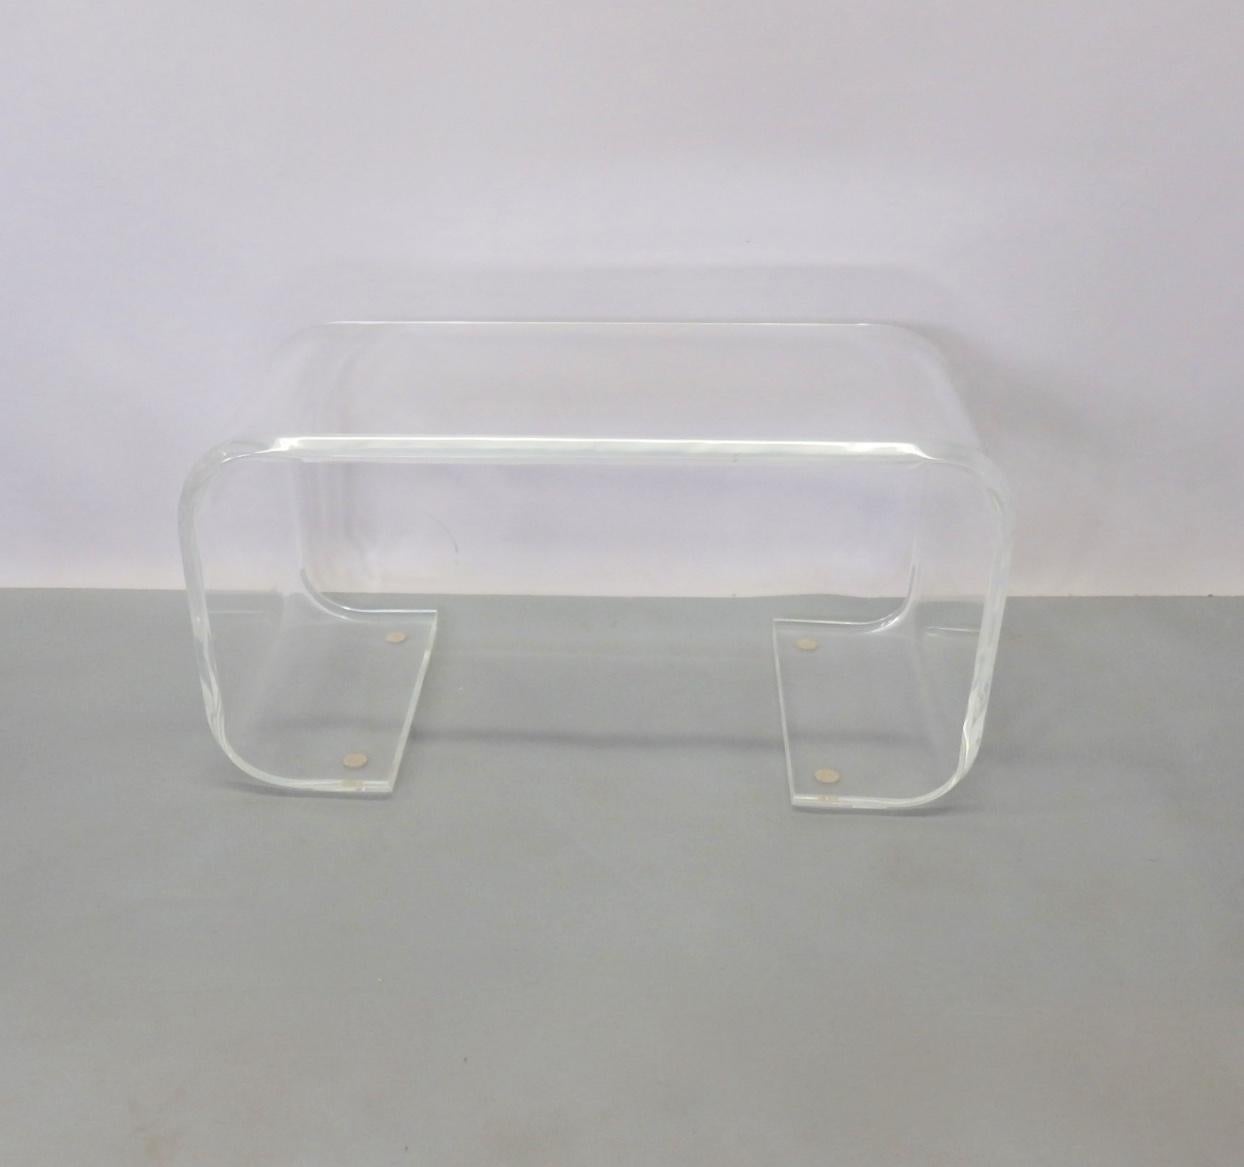 Thick Lucite acrylic coffee, cocktail table. Easily used as a bench with or without your custom cushion.